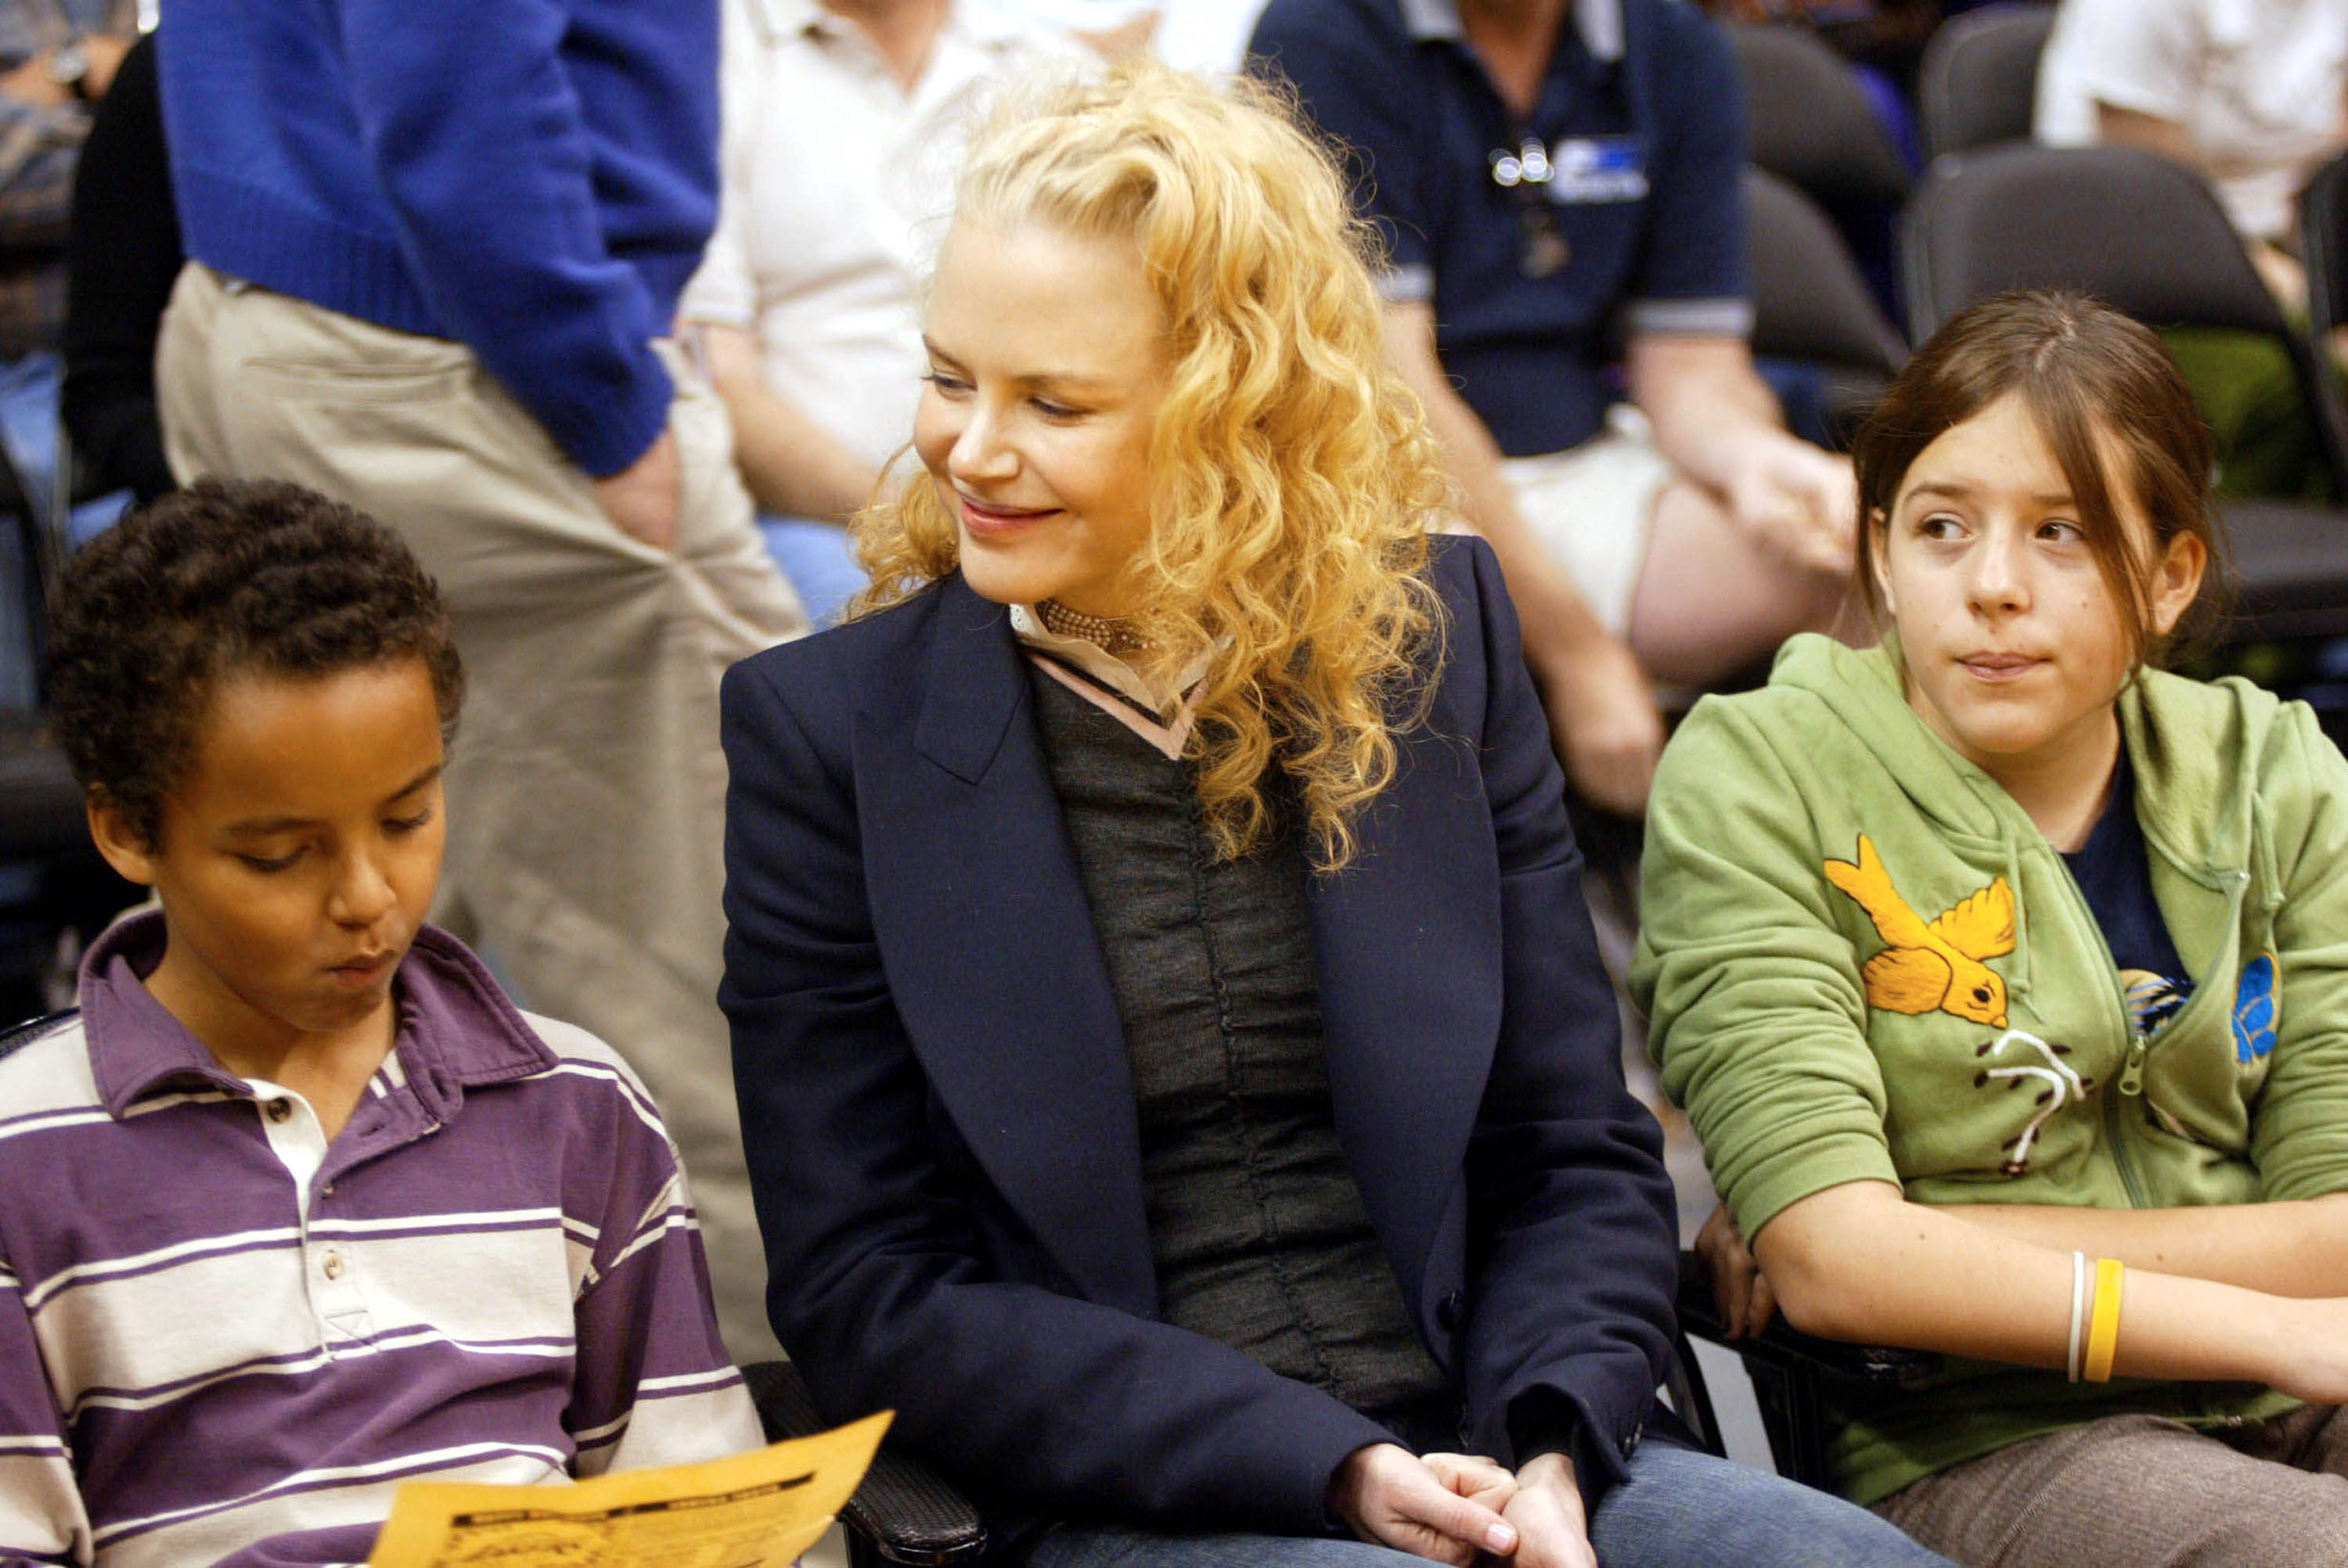 Nicole Kidman with Connor and Isabella Cruise at a game between the Los Angeles Lakers and the Miami Heat at the Staples Center December 25, 2004 in Los Angeles, California | Source: Getty Images